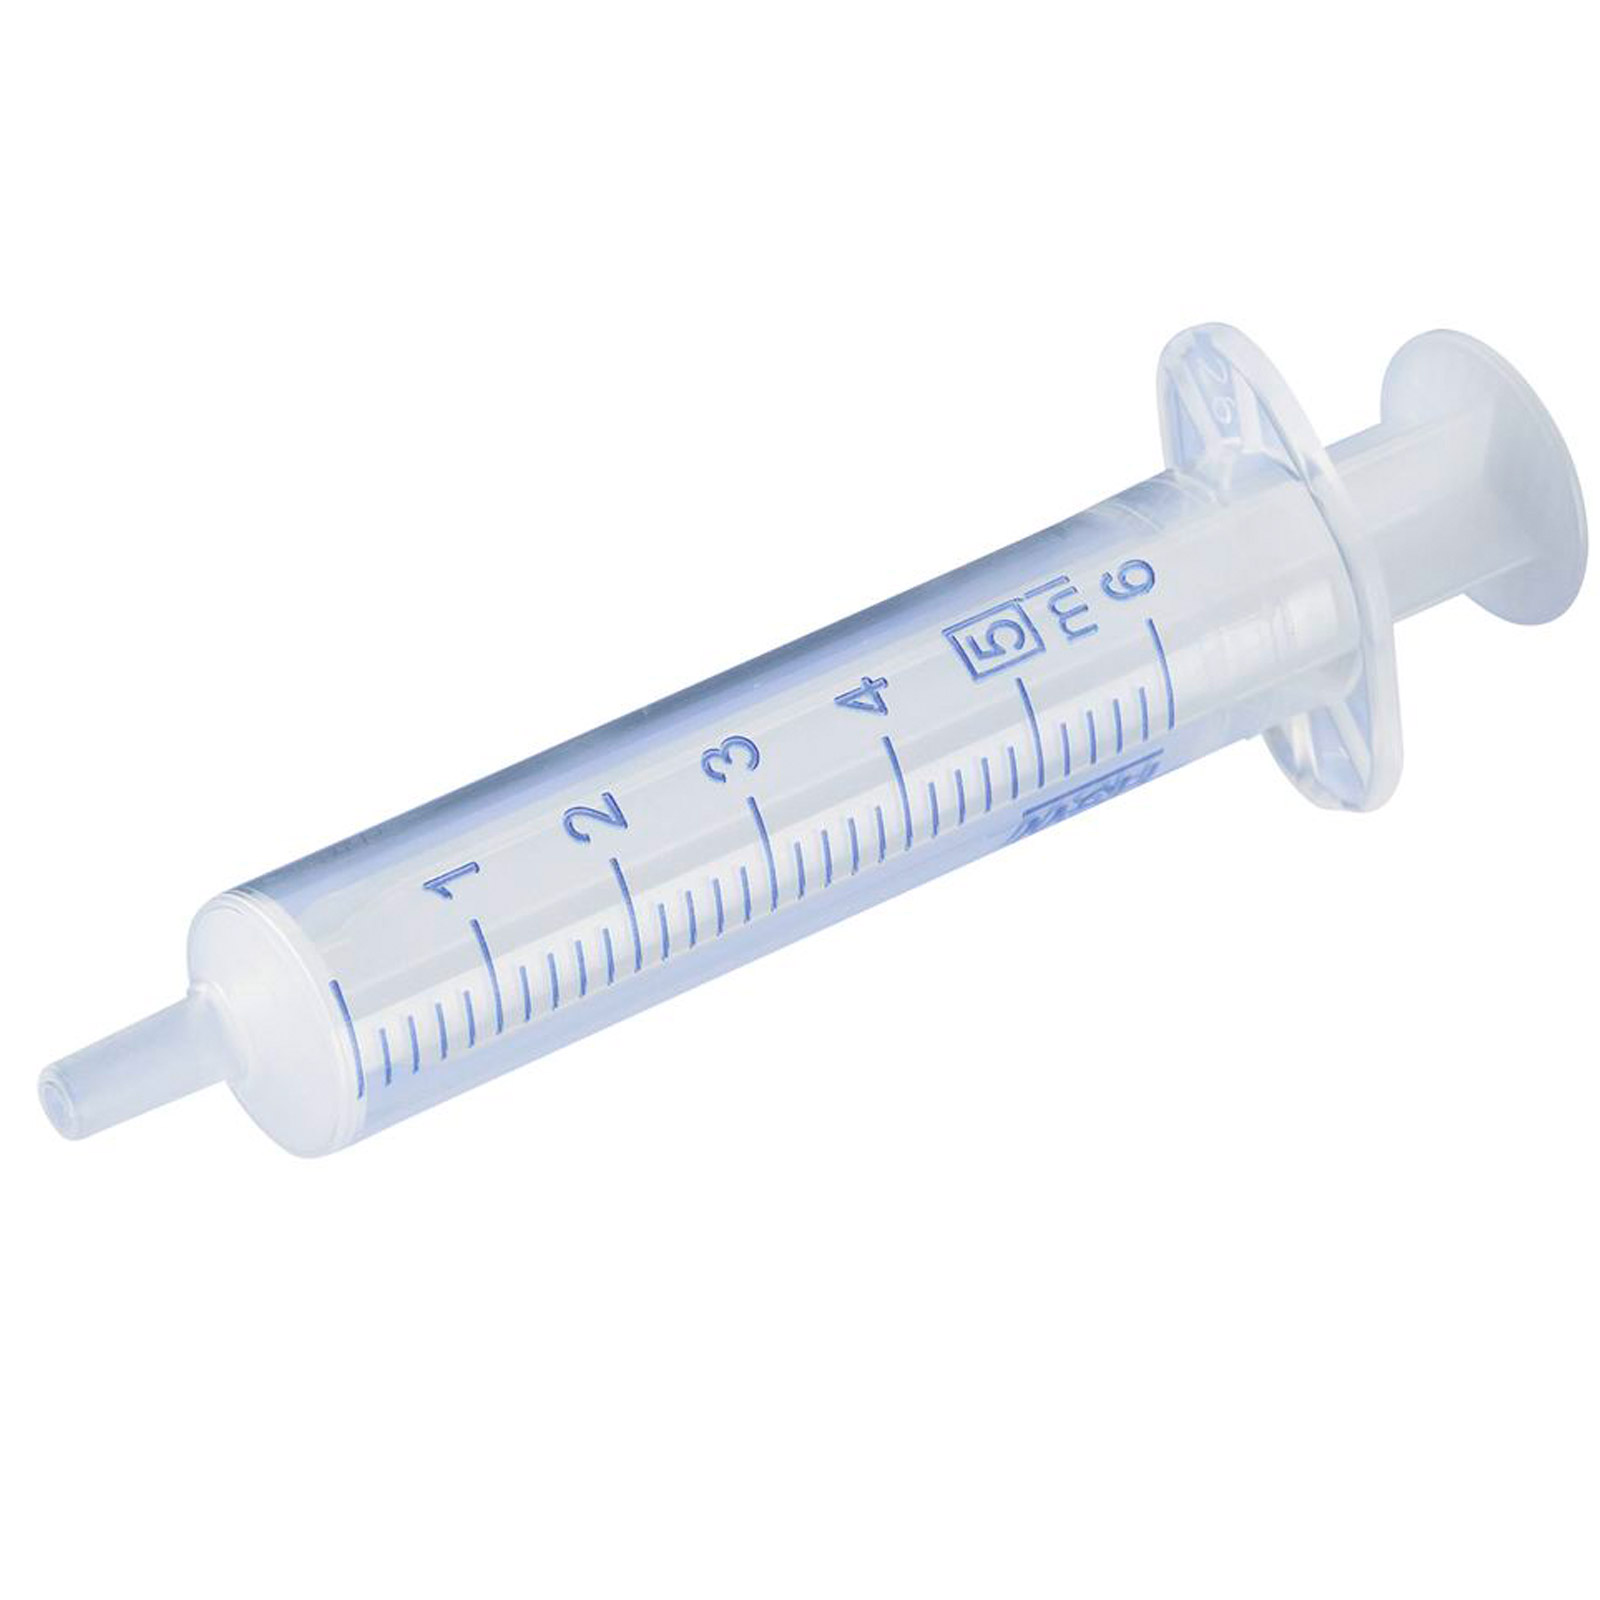 HSW NORM-JECT disposable syringes